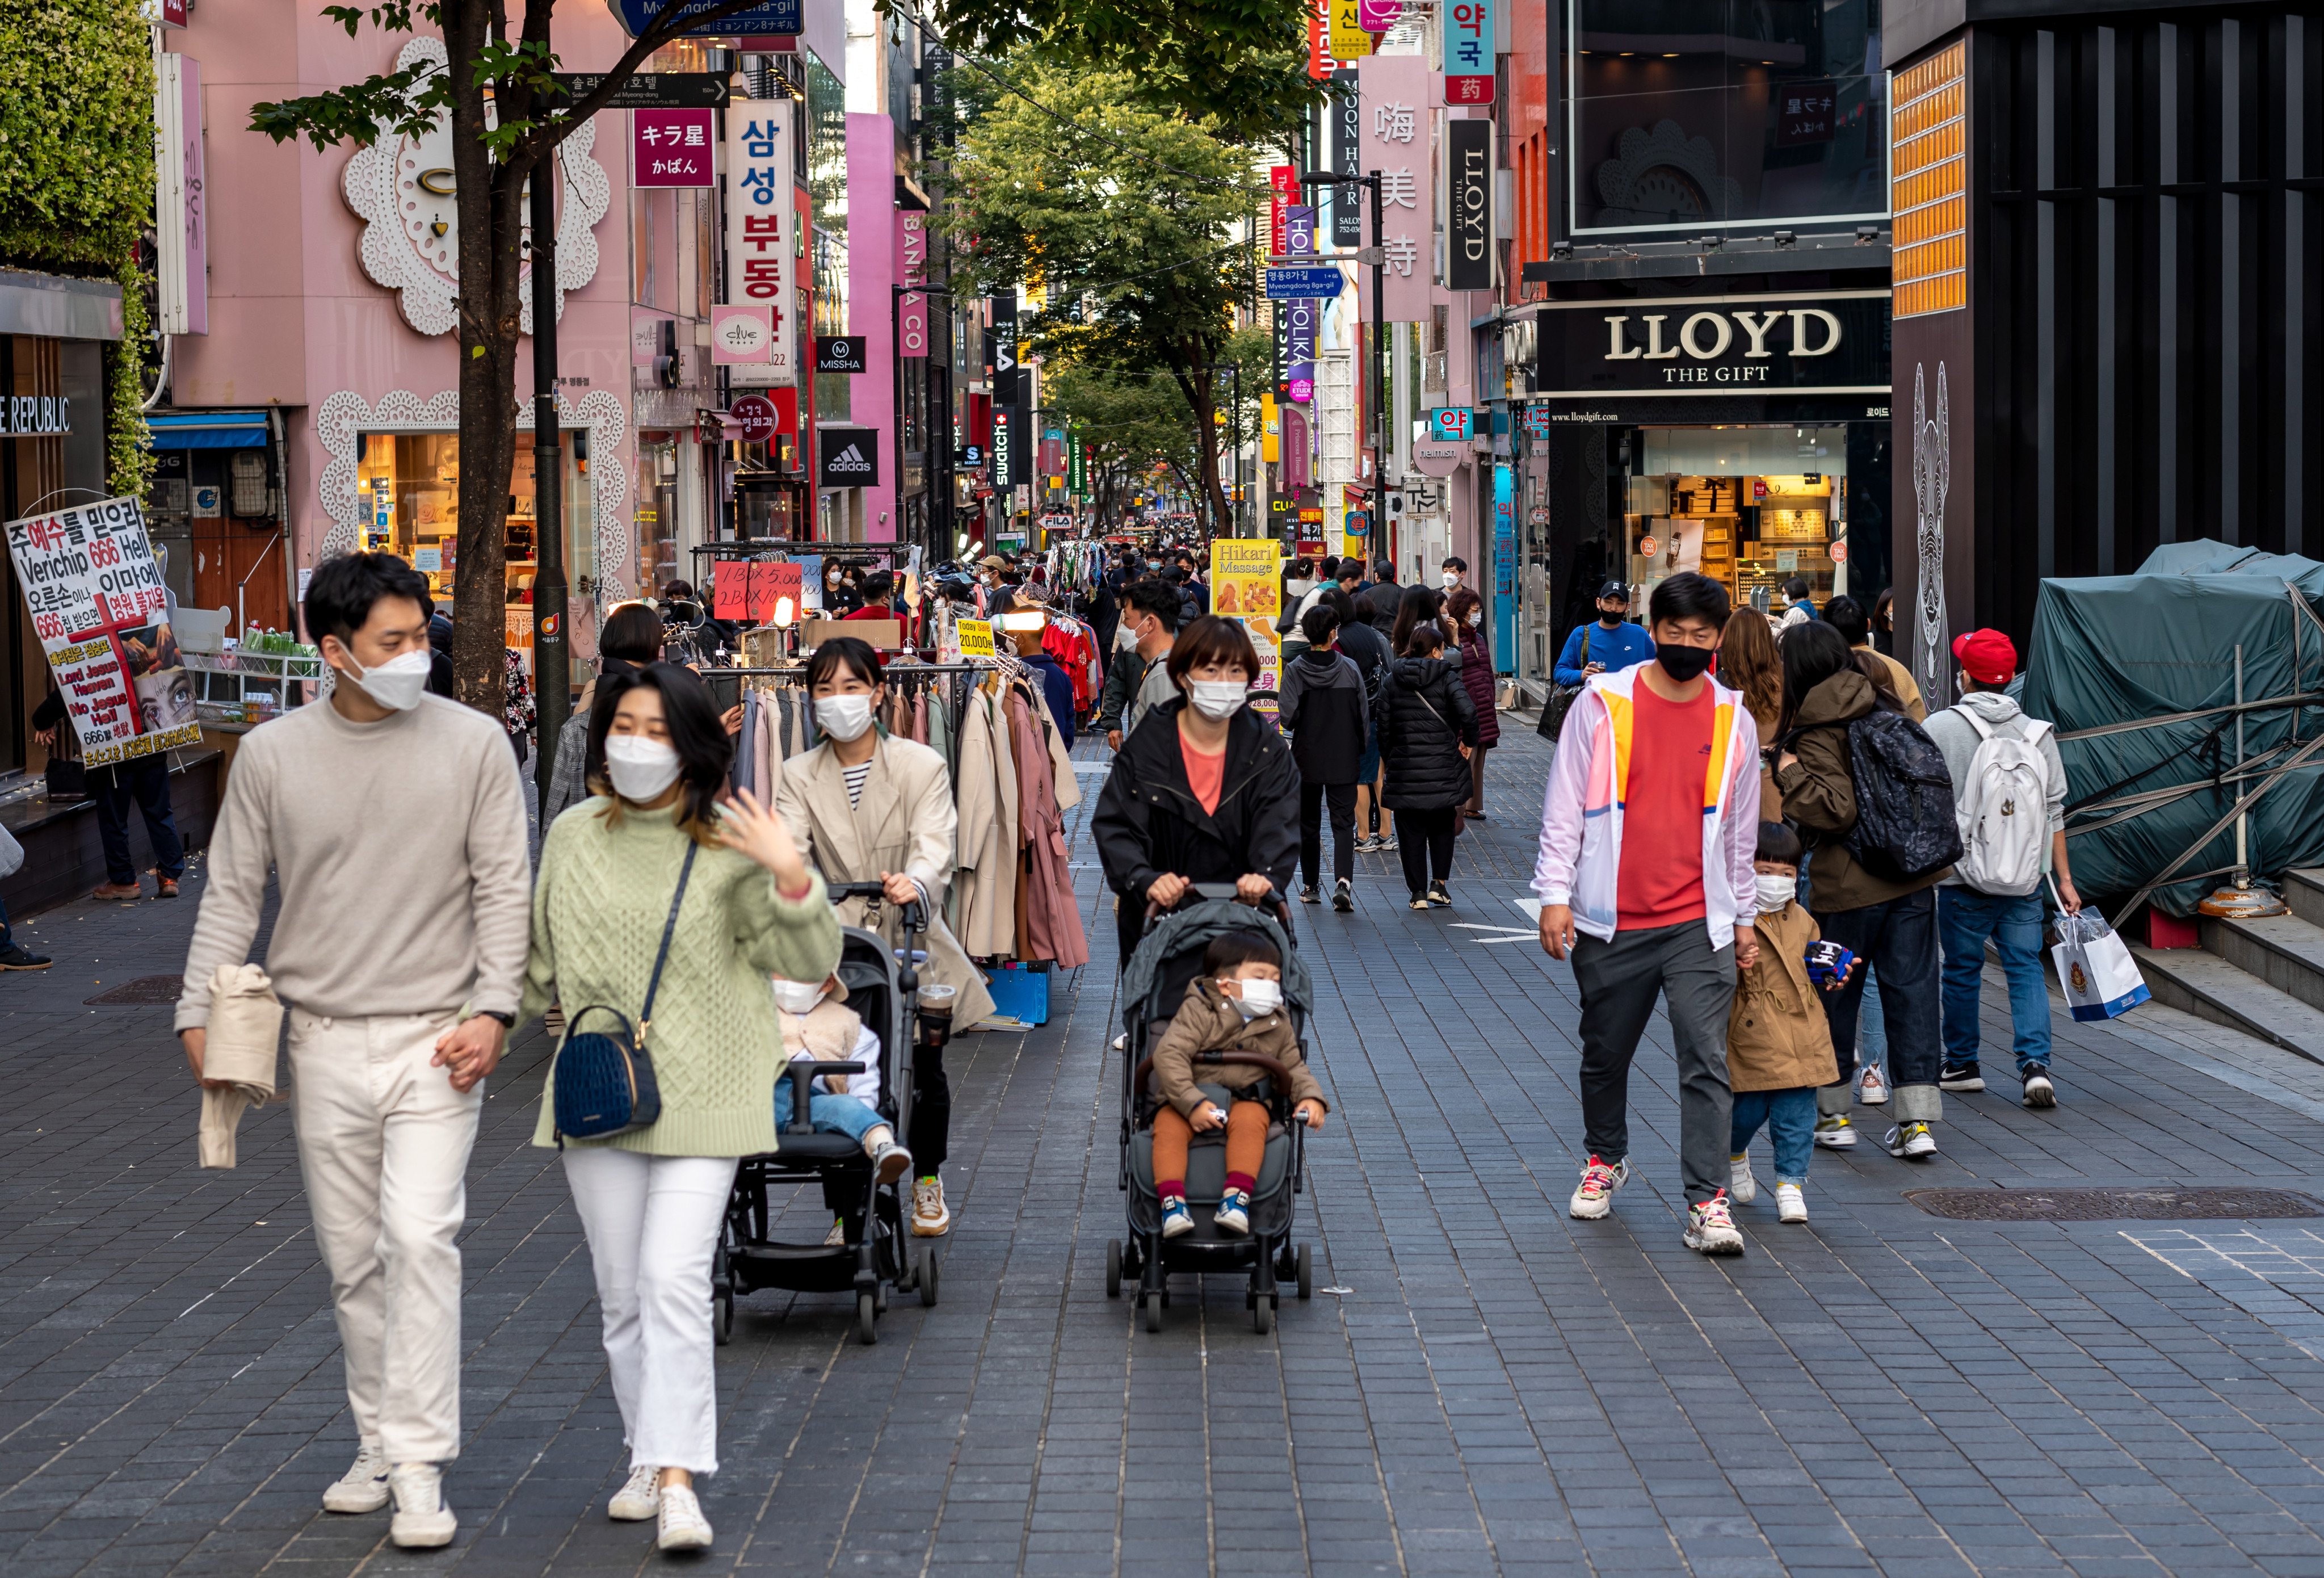 People and tourists at a shopping street in Myeongdong, Seoul. Photo: Shutterstock